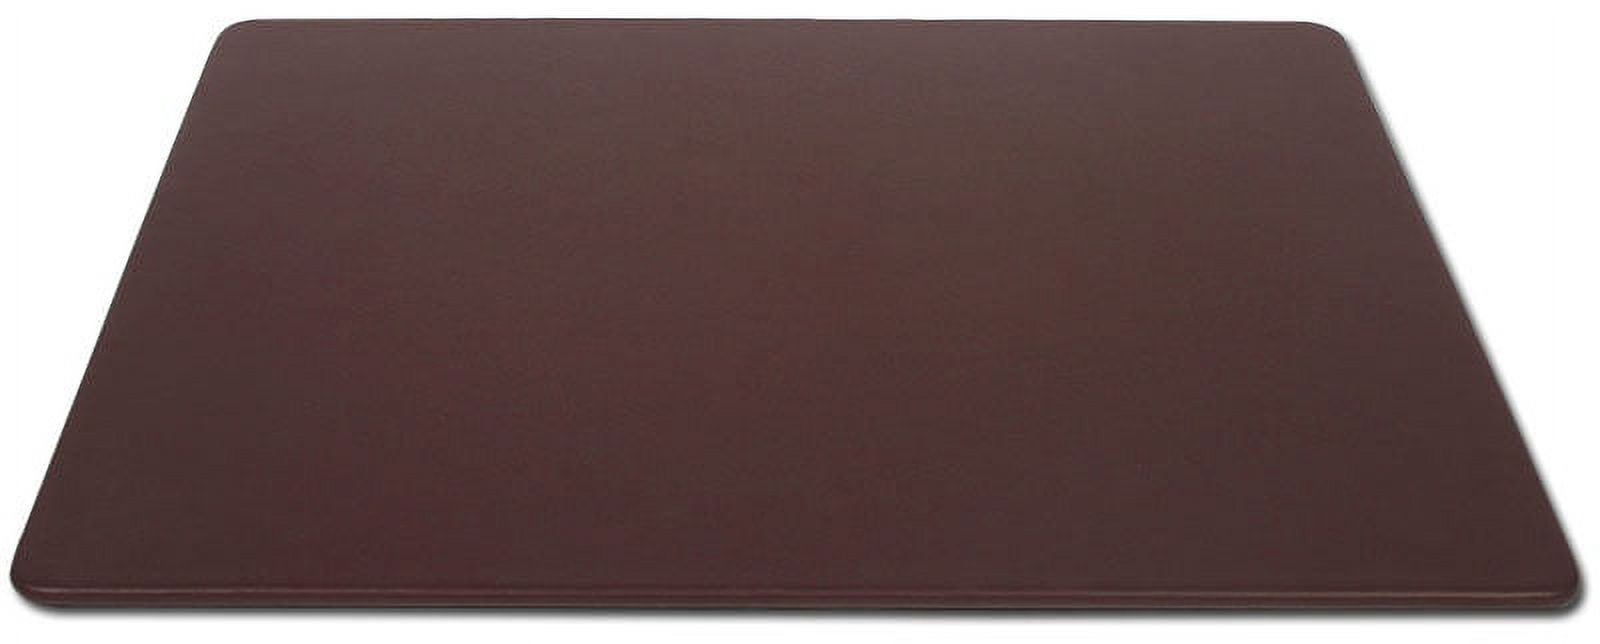 P3431 20 X 16 In. Leatherette Conference Table Pad - Chocolate Brown